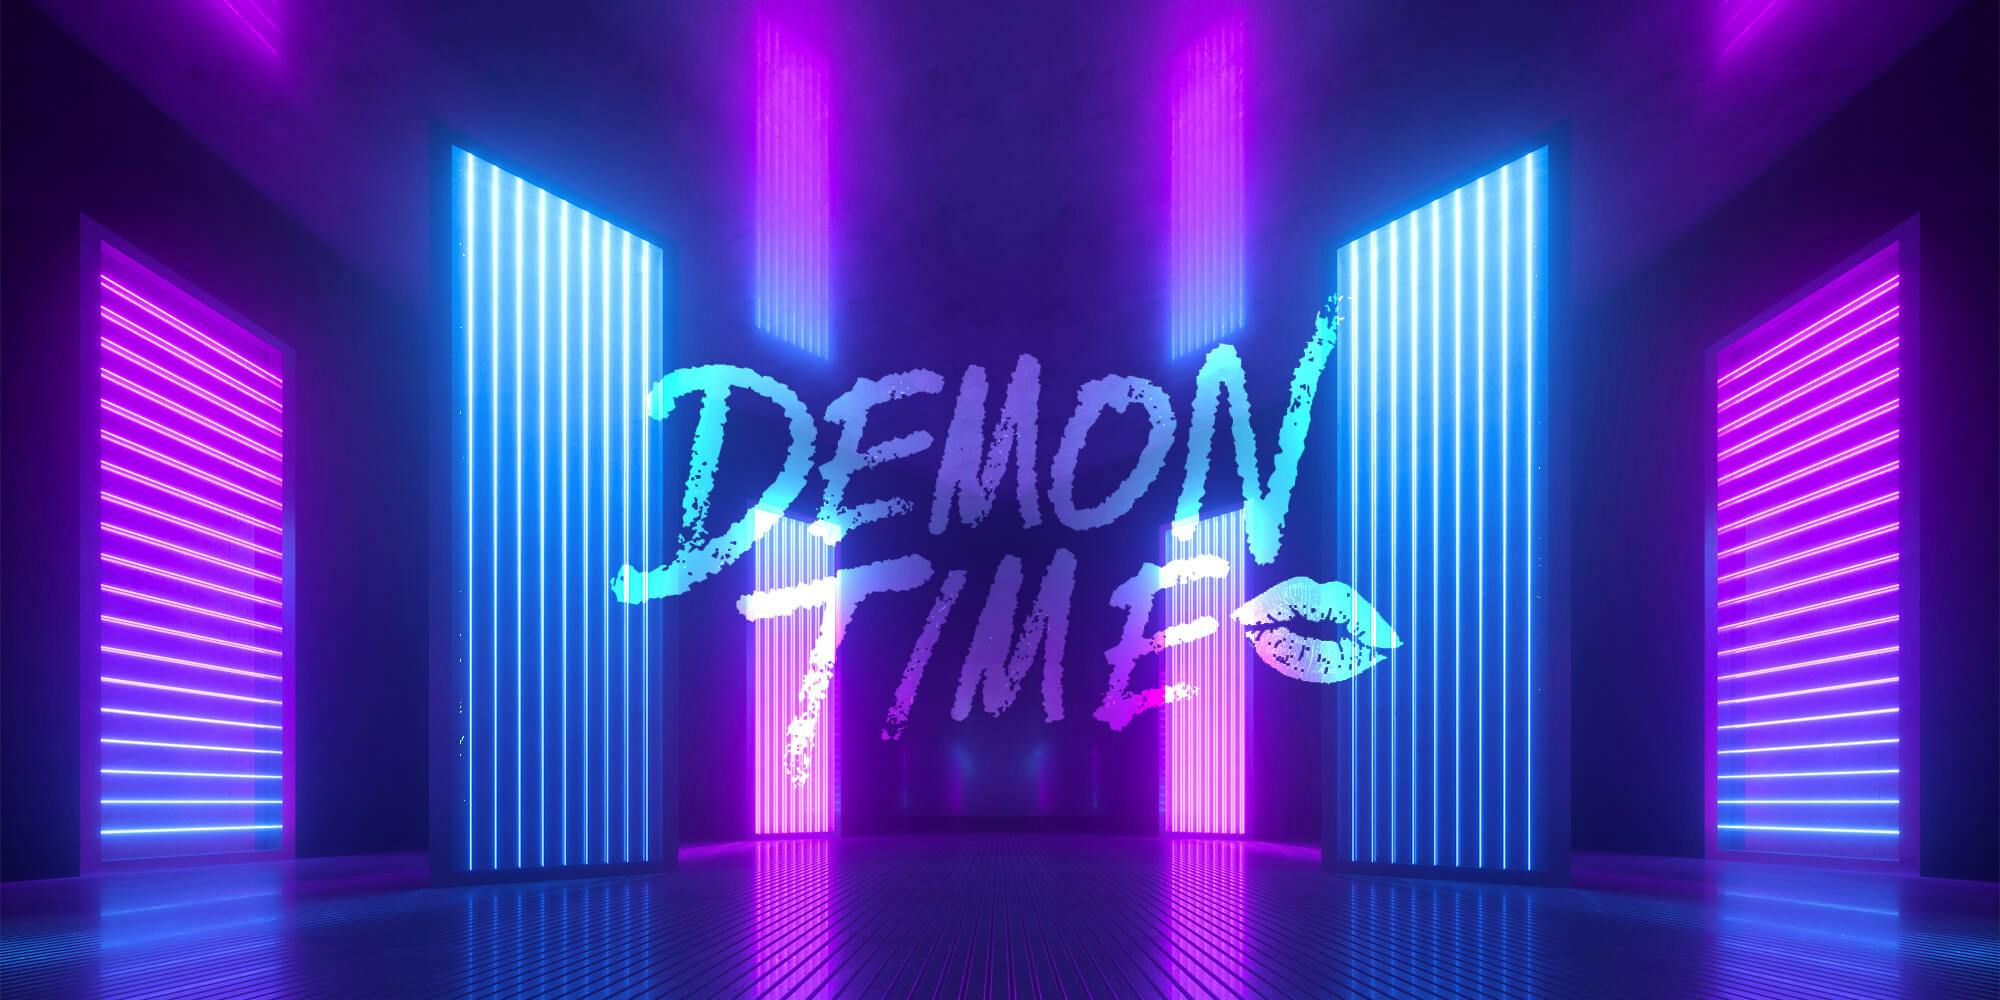 OnlyFans and Demon Time Are Launching a Virtual Strip Club